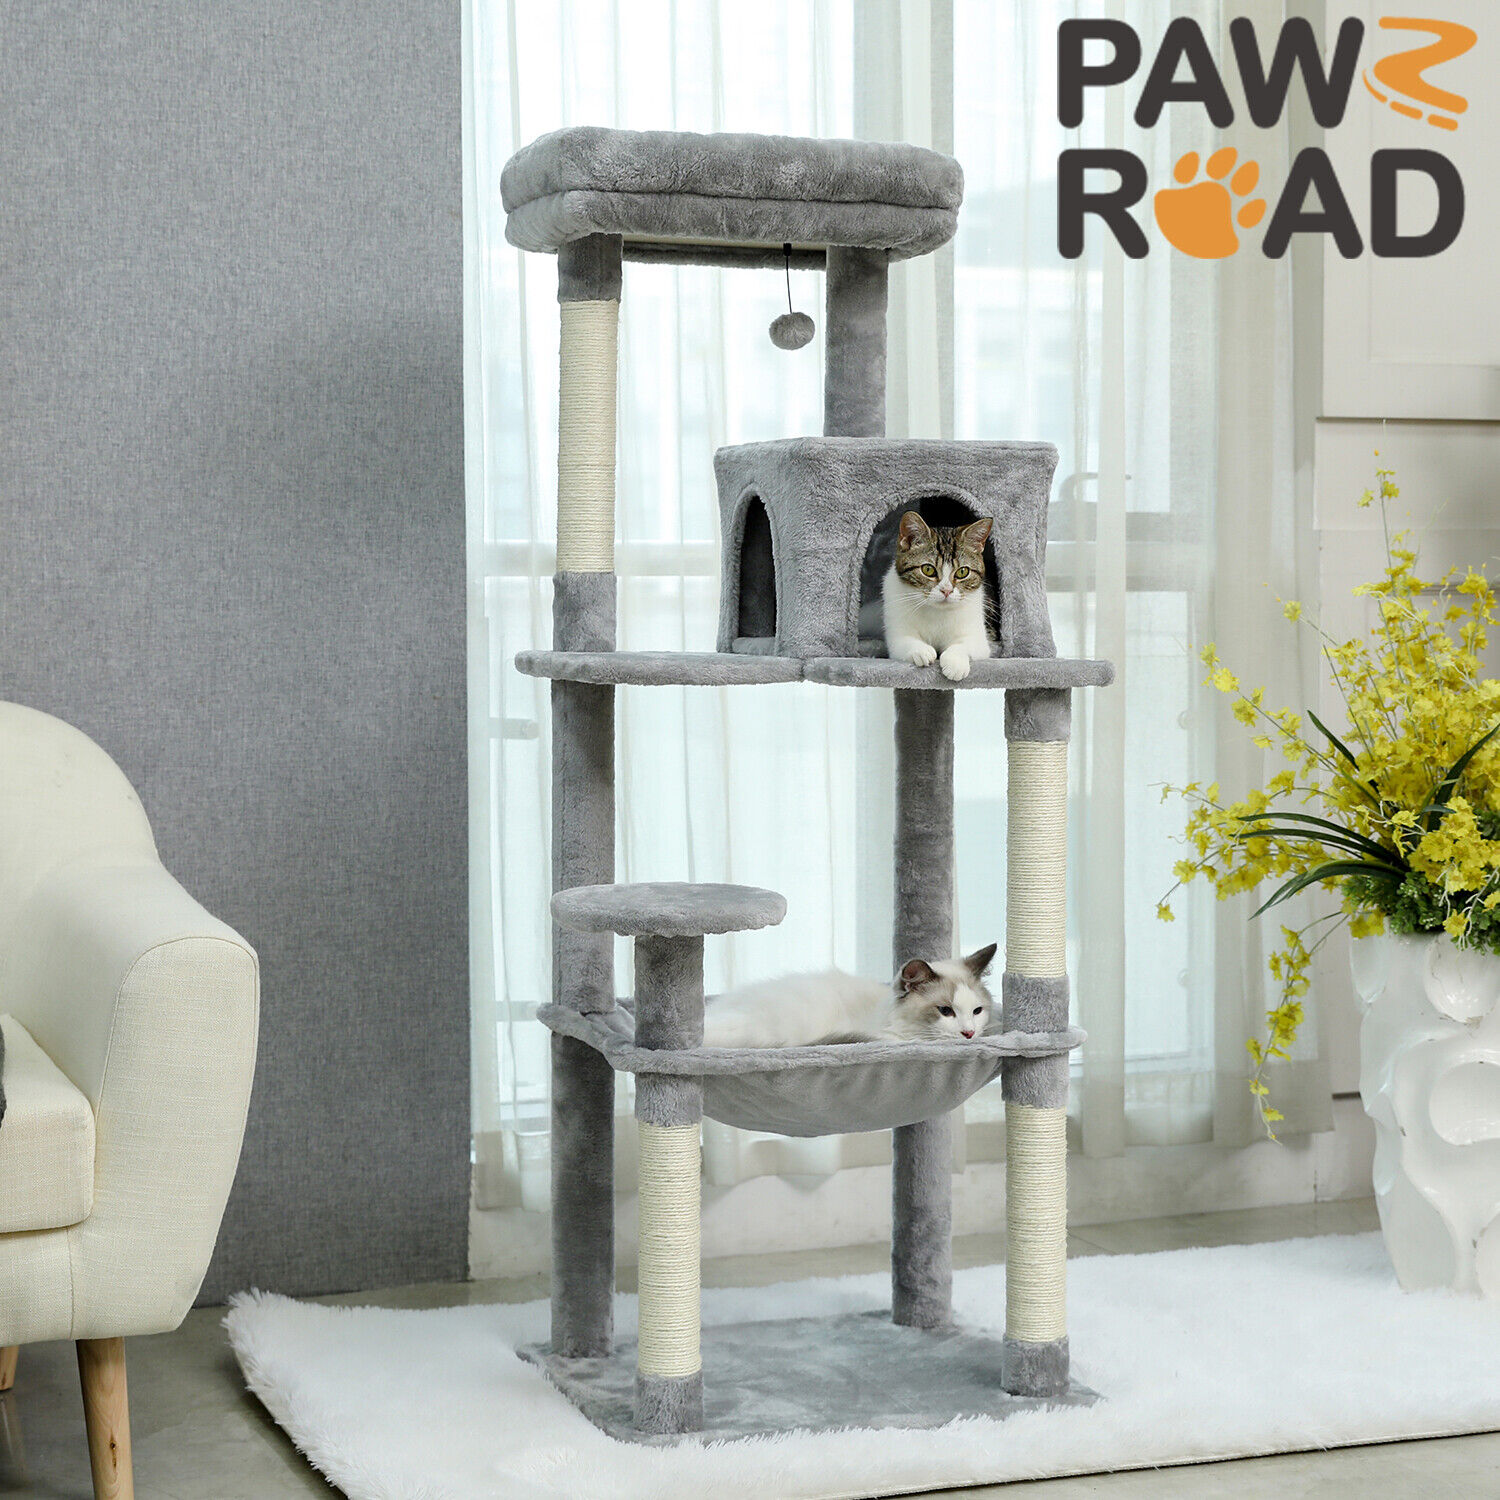 PAWZ Road Cat Tree Tower Scratching Post Scratcher Cat Condo House Bed Furniture